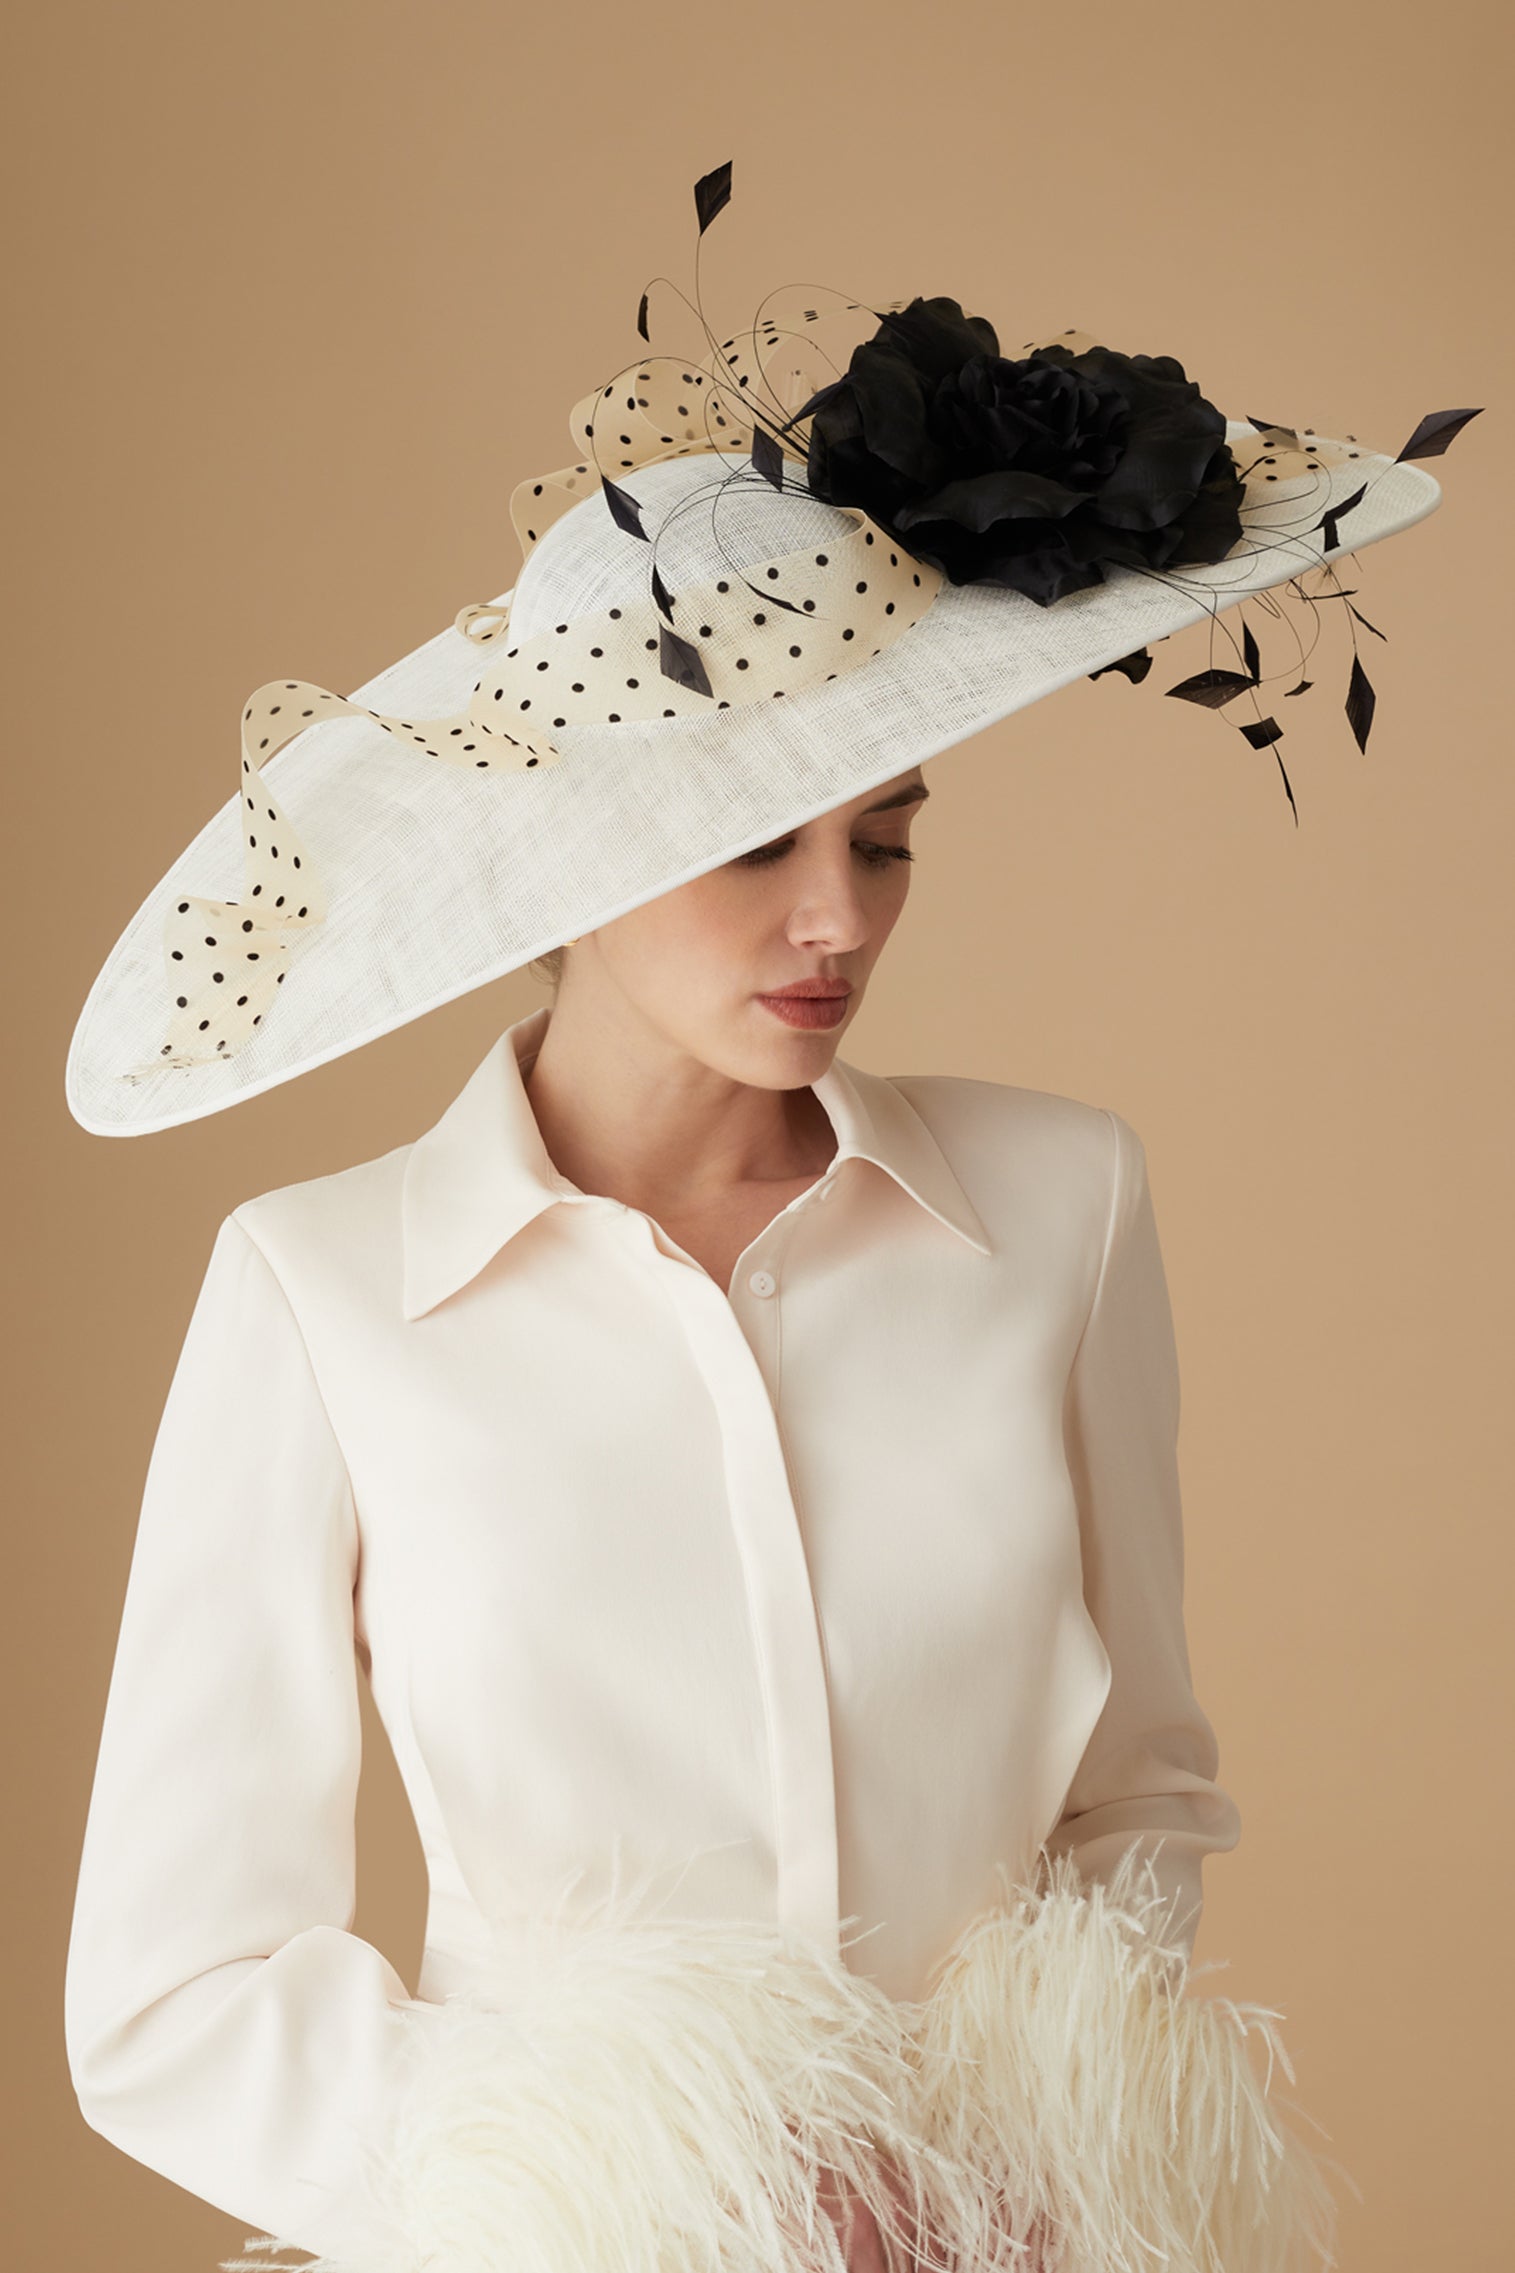 Vanilla White Slice Hat - Lock Couture by Awon Golding - Lock & Co. Hatters London UK